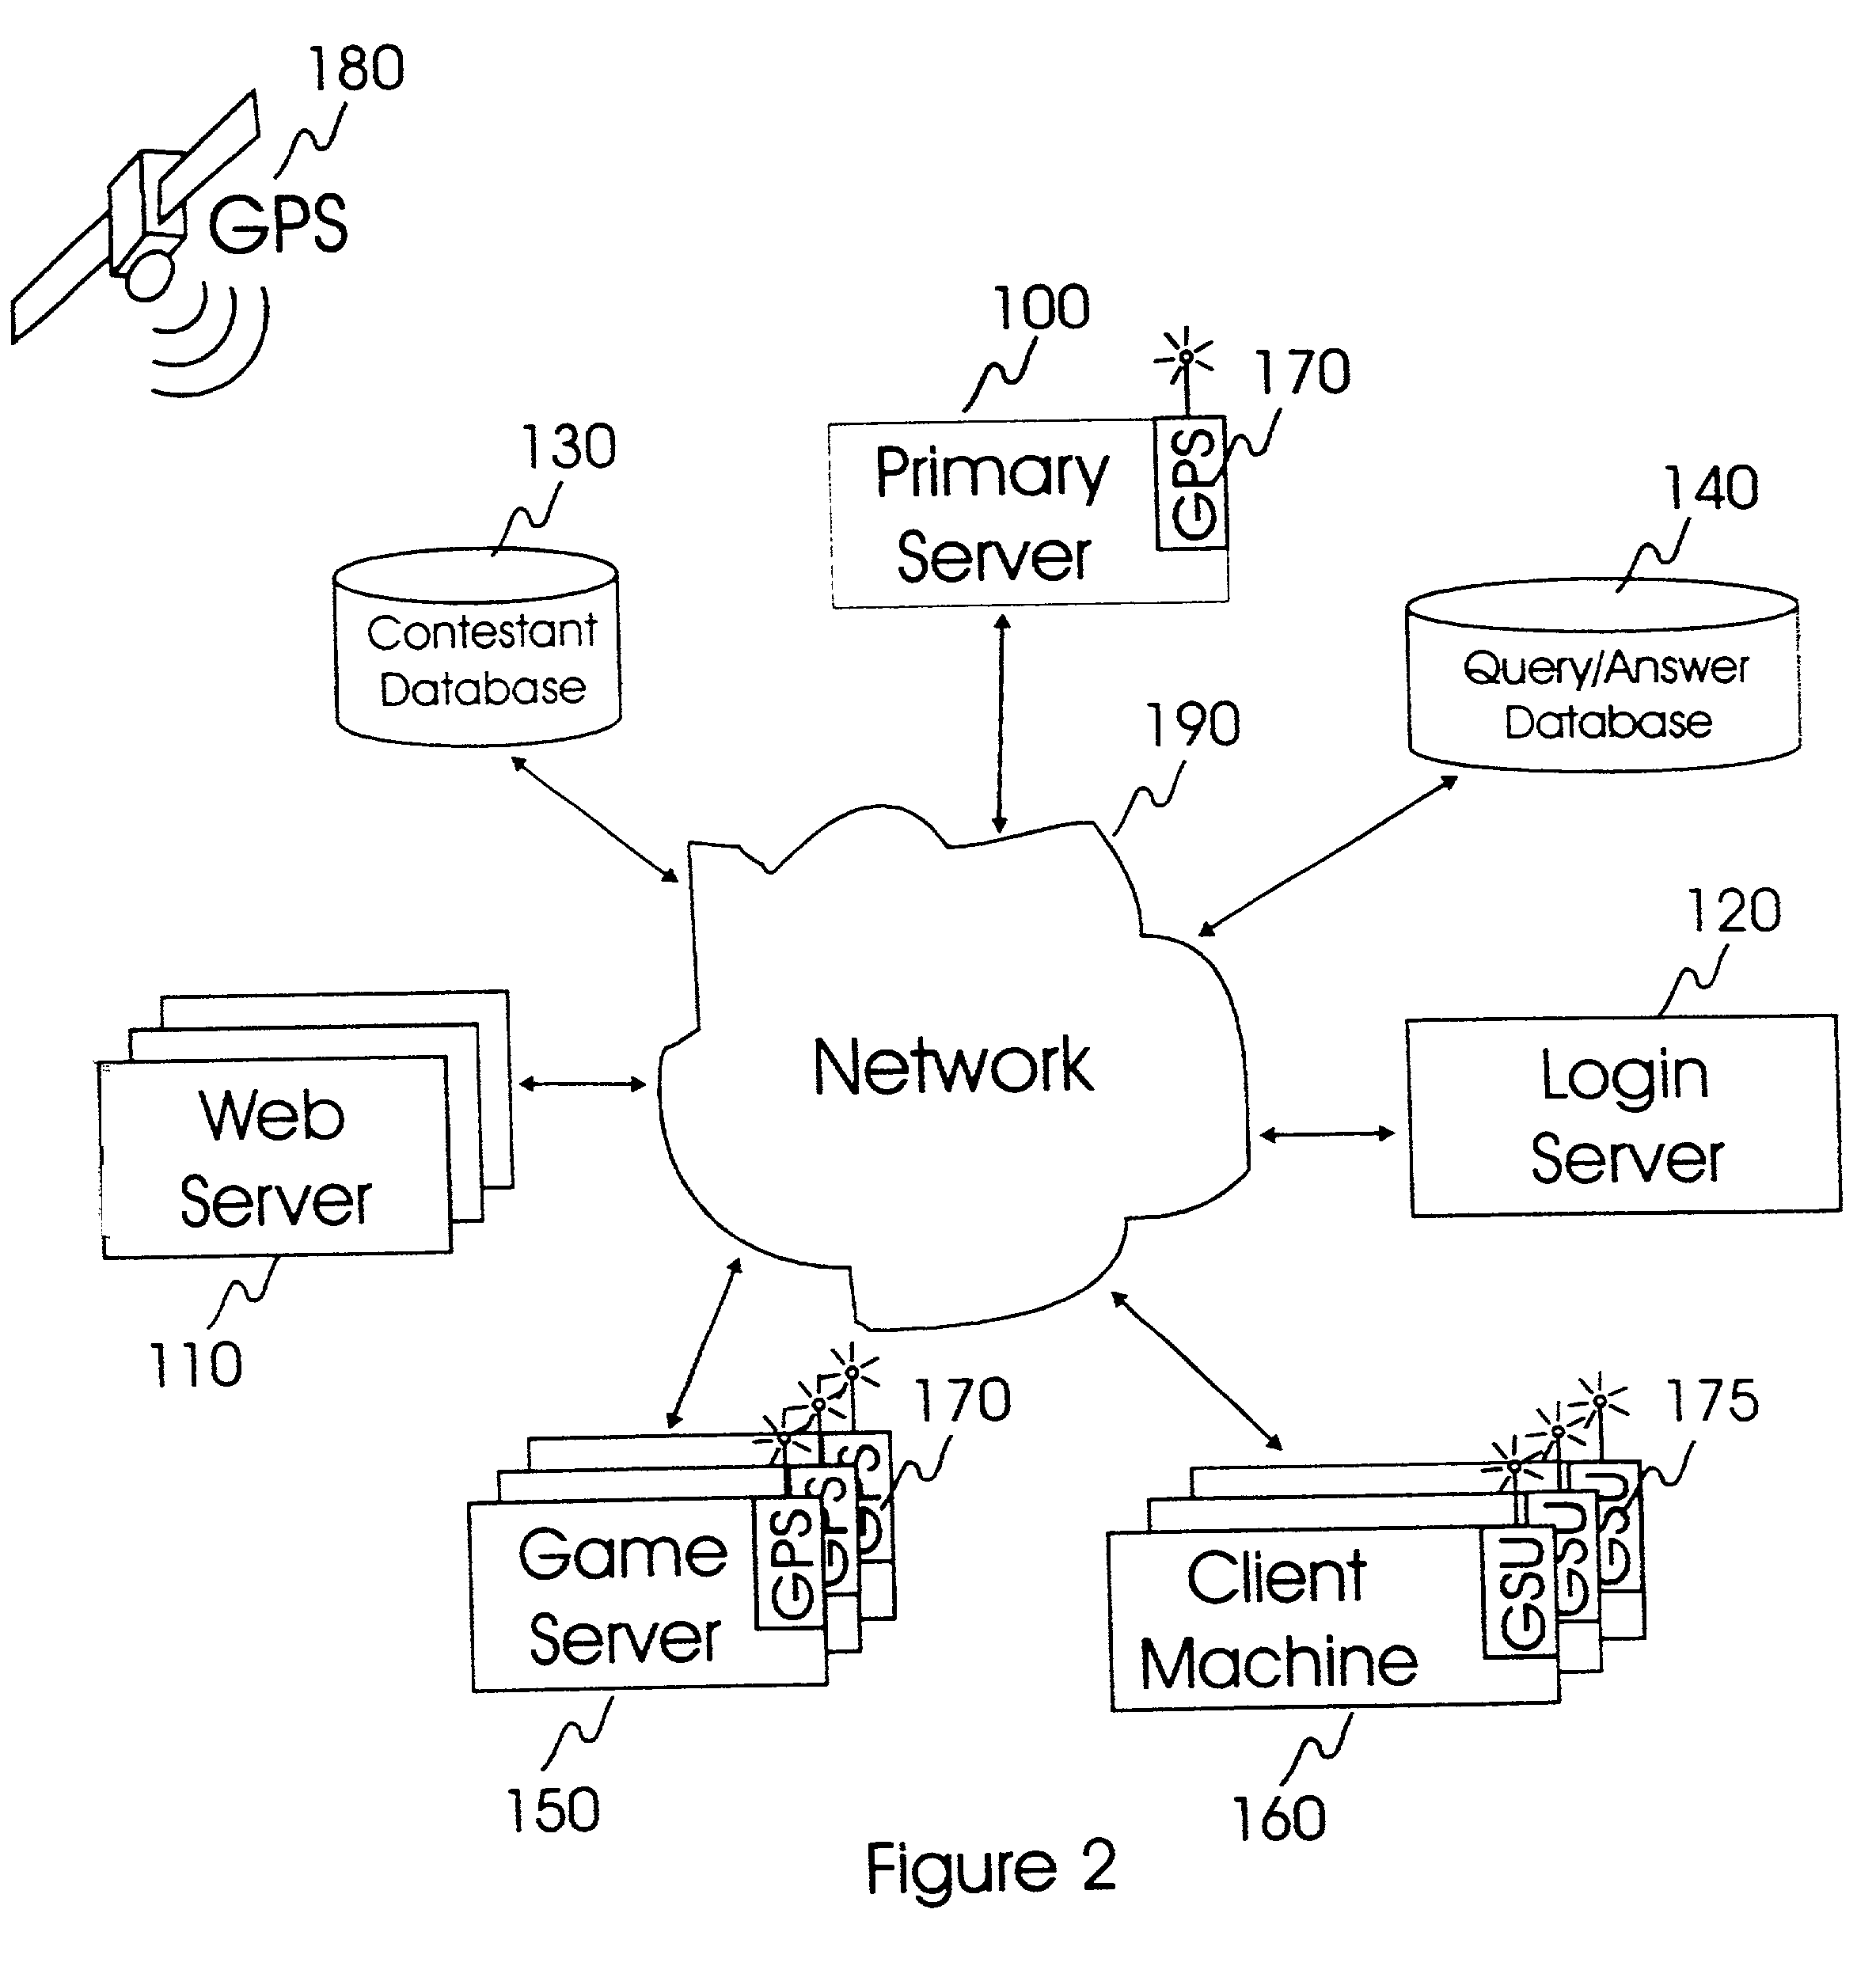 Global synchronization unit (GSU) for time and space (TS) stamping of input data elements